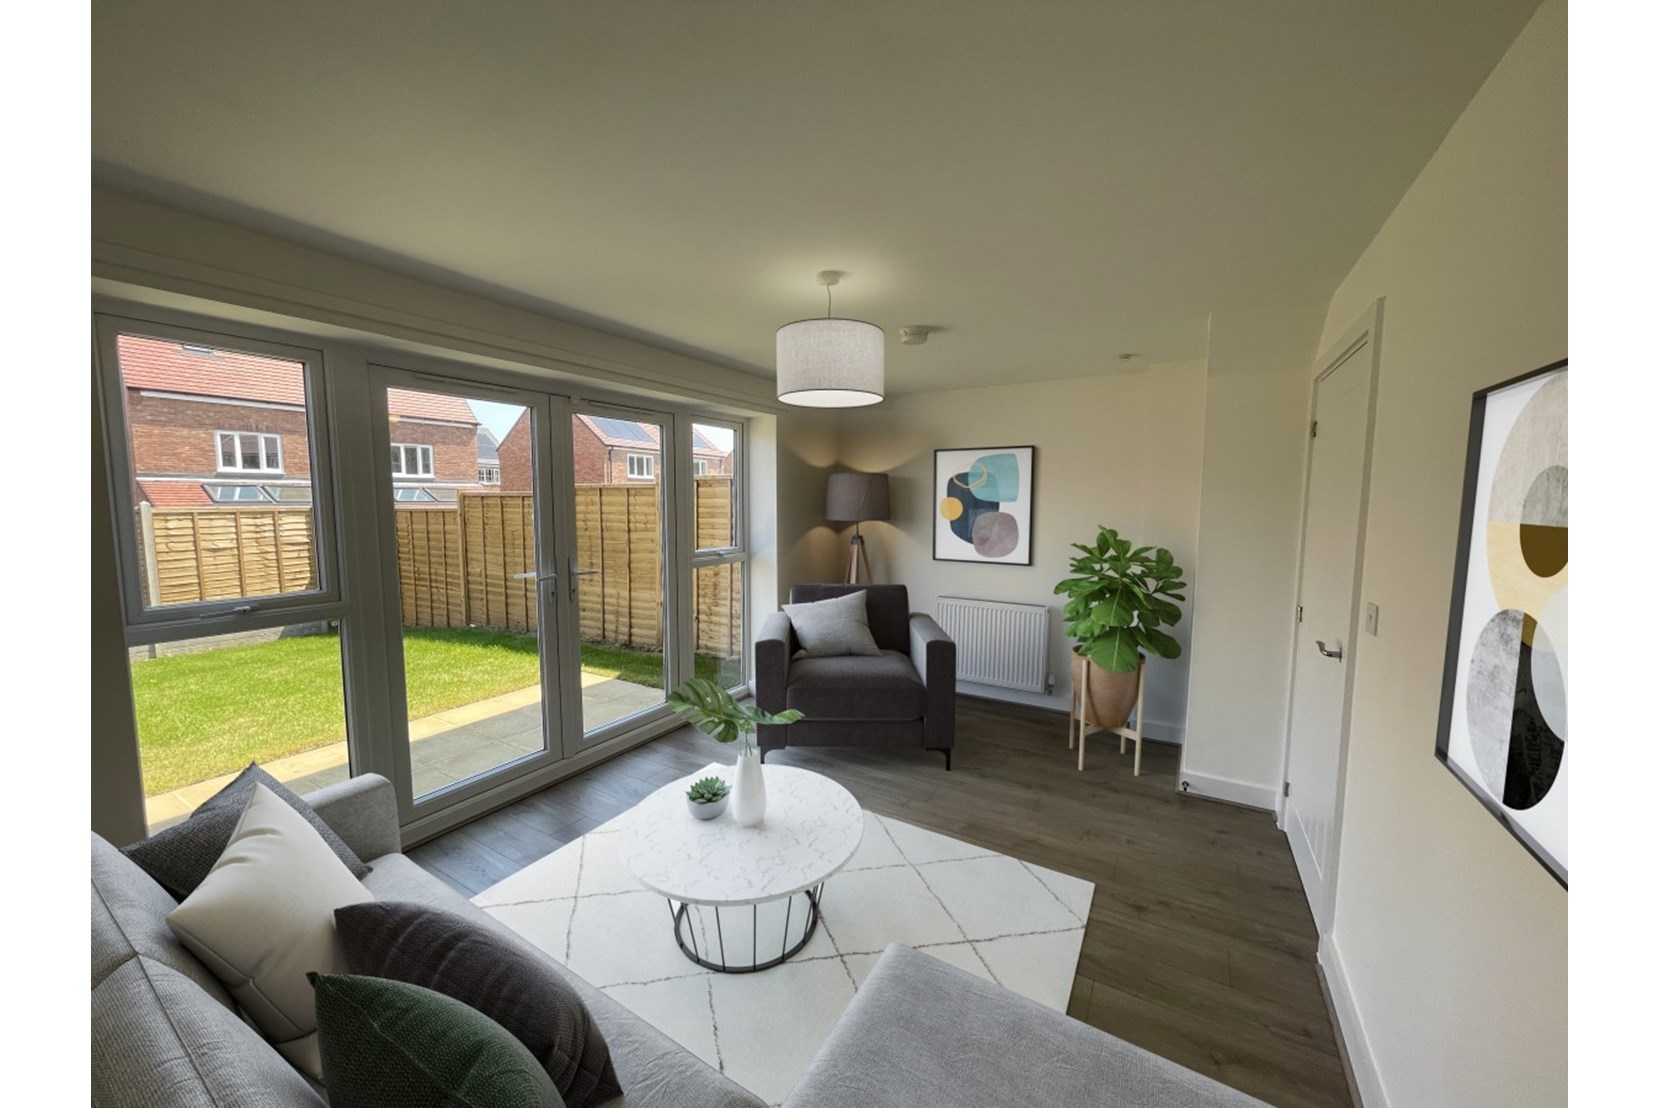 House-Allsop-The-Pioneers-Houlton-Rugby-interior-living-area